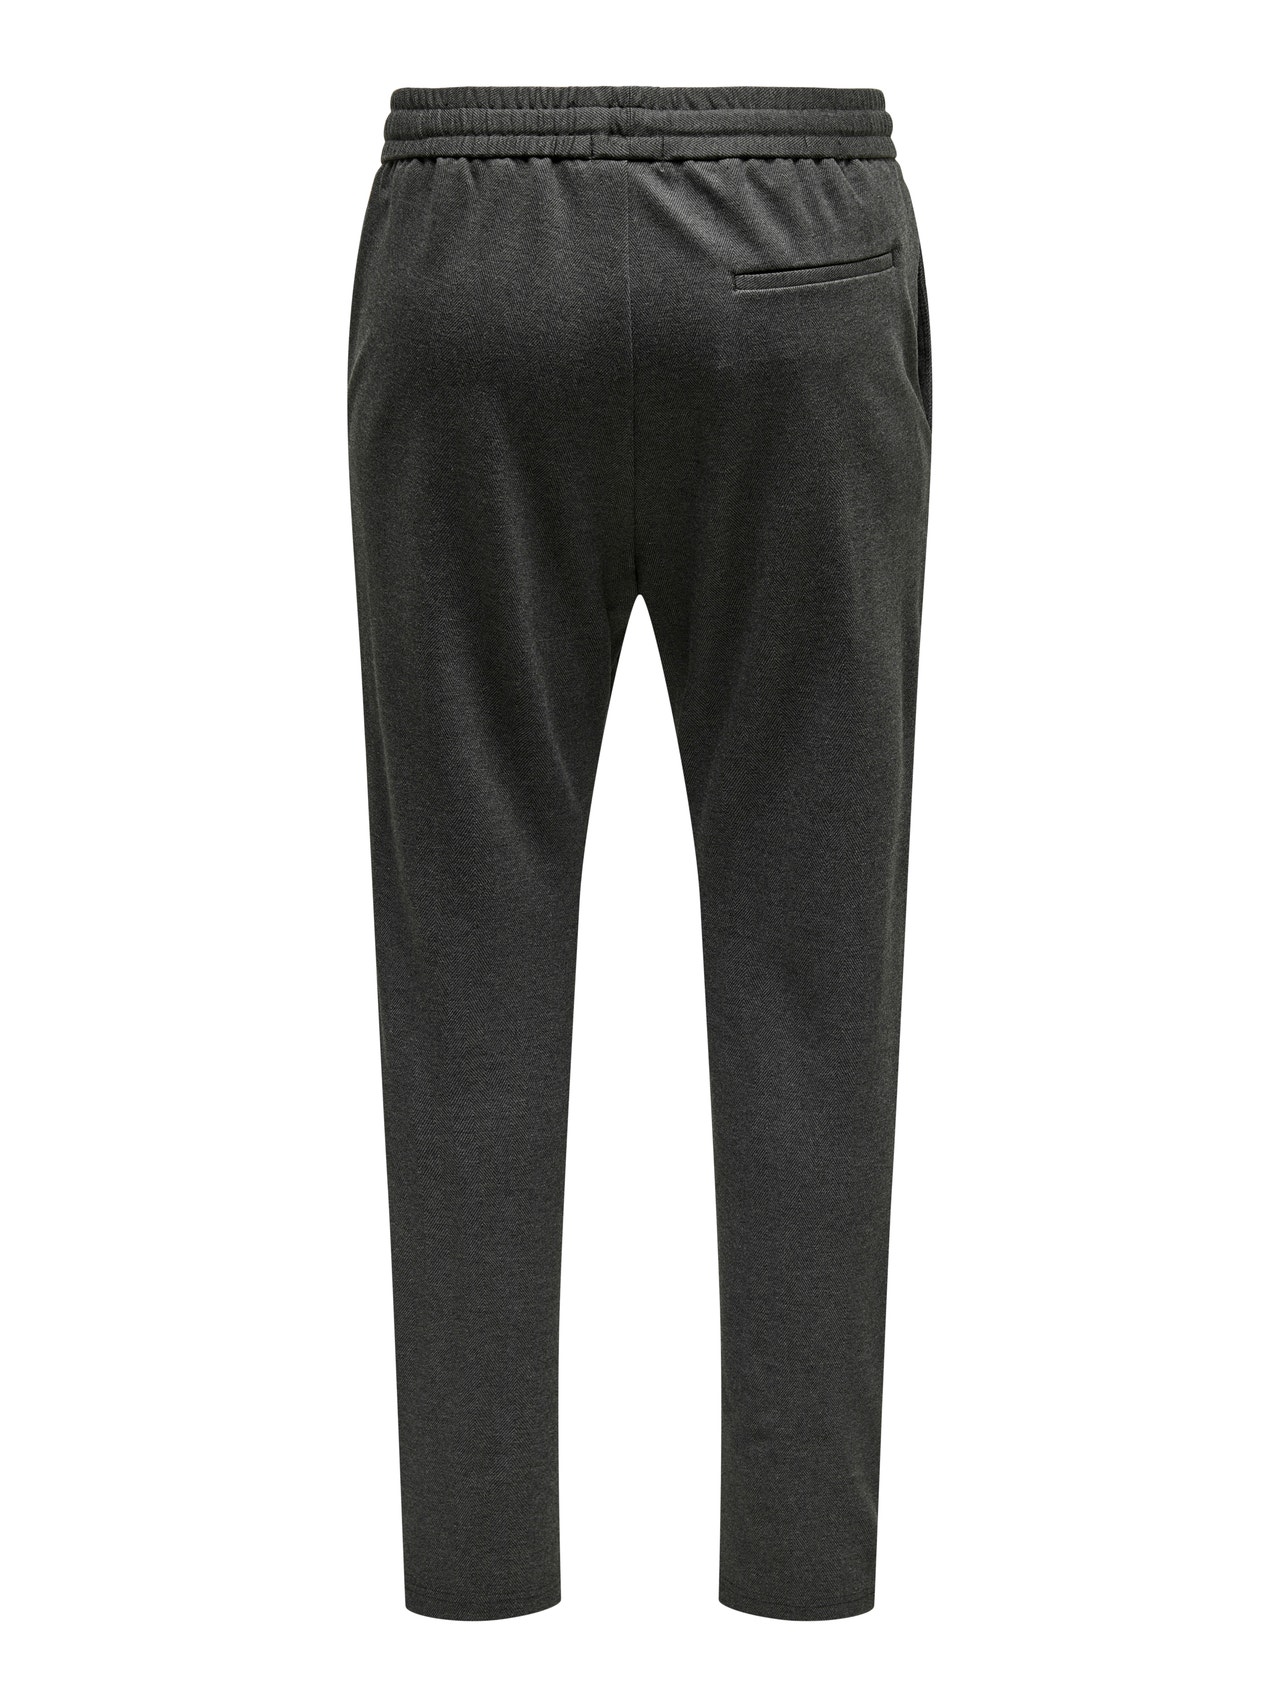 ONLY & SONS Classic joggers -Black - 22023494